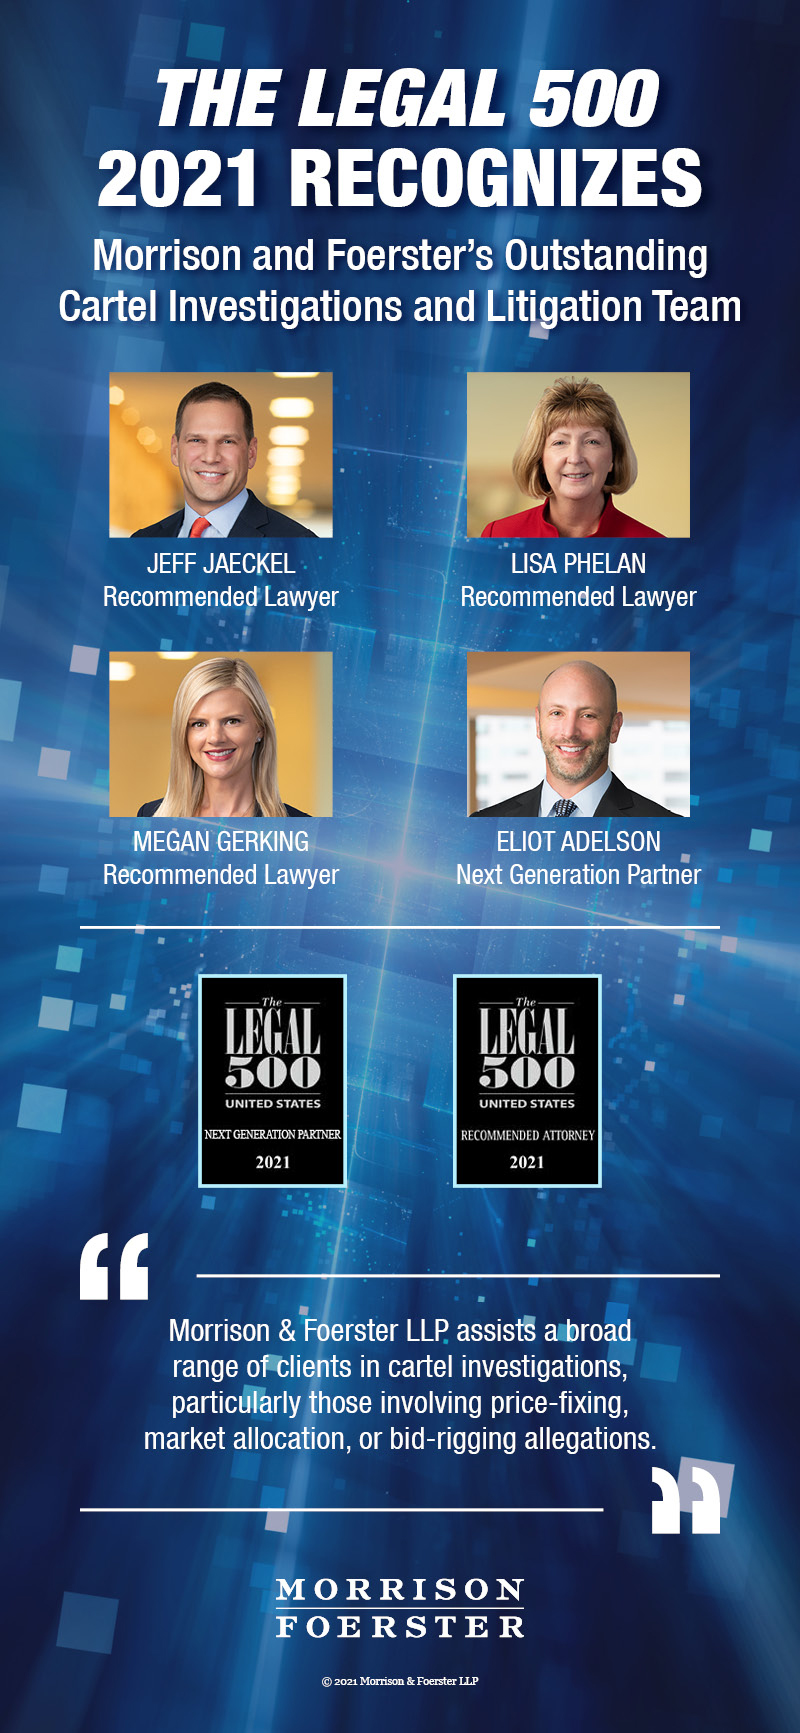 The Legal 500 US 2021 Recognizes Morrison and Foerster’s Outstanding Cartel Investigations and Litigation Team